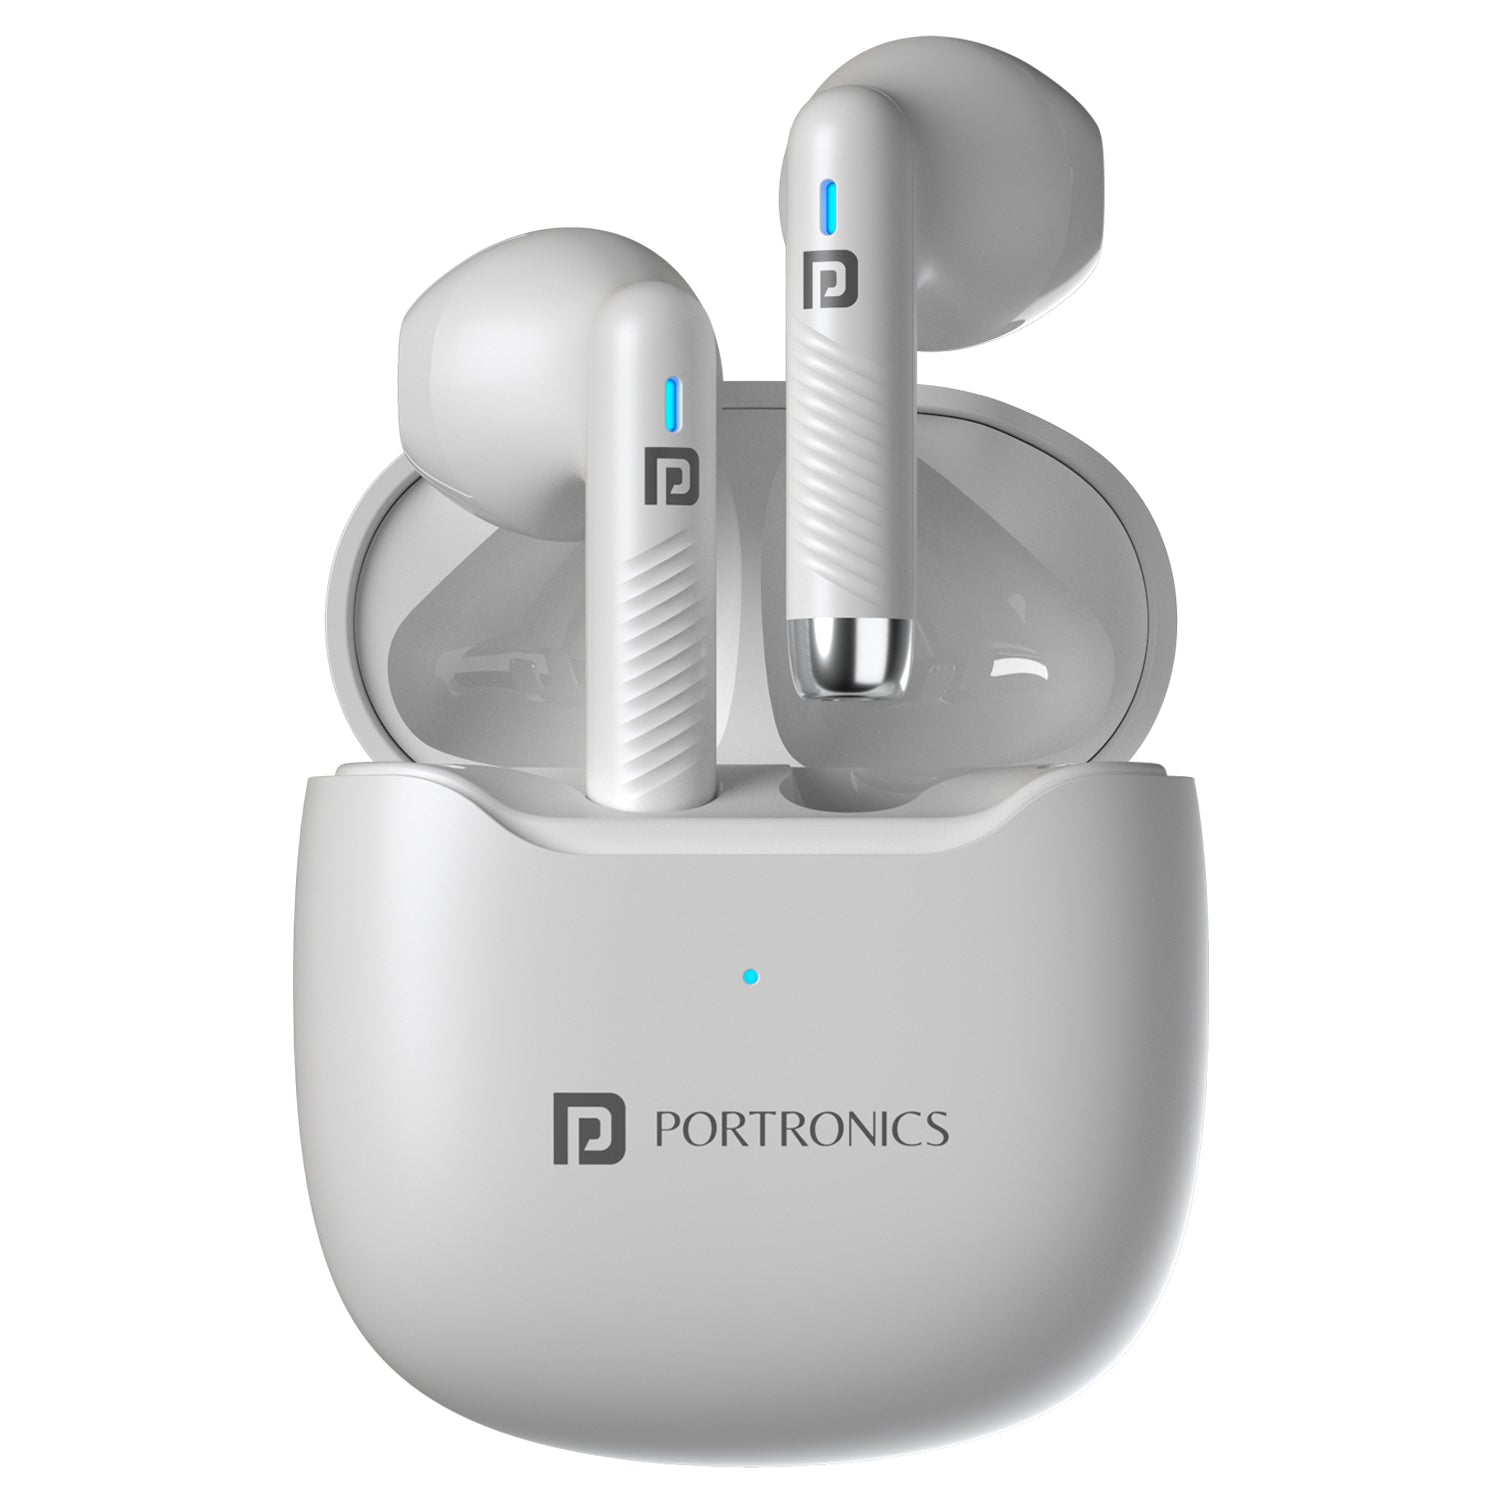 Portronics Harmonics Twins s12 Smart wireless TWS earbuds| earbuds with noise cancelling online| Bluetooth earbuds with mic| best earbuds| latest earbuds with mic